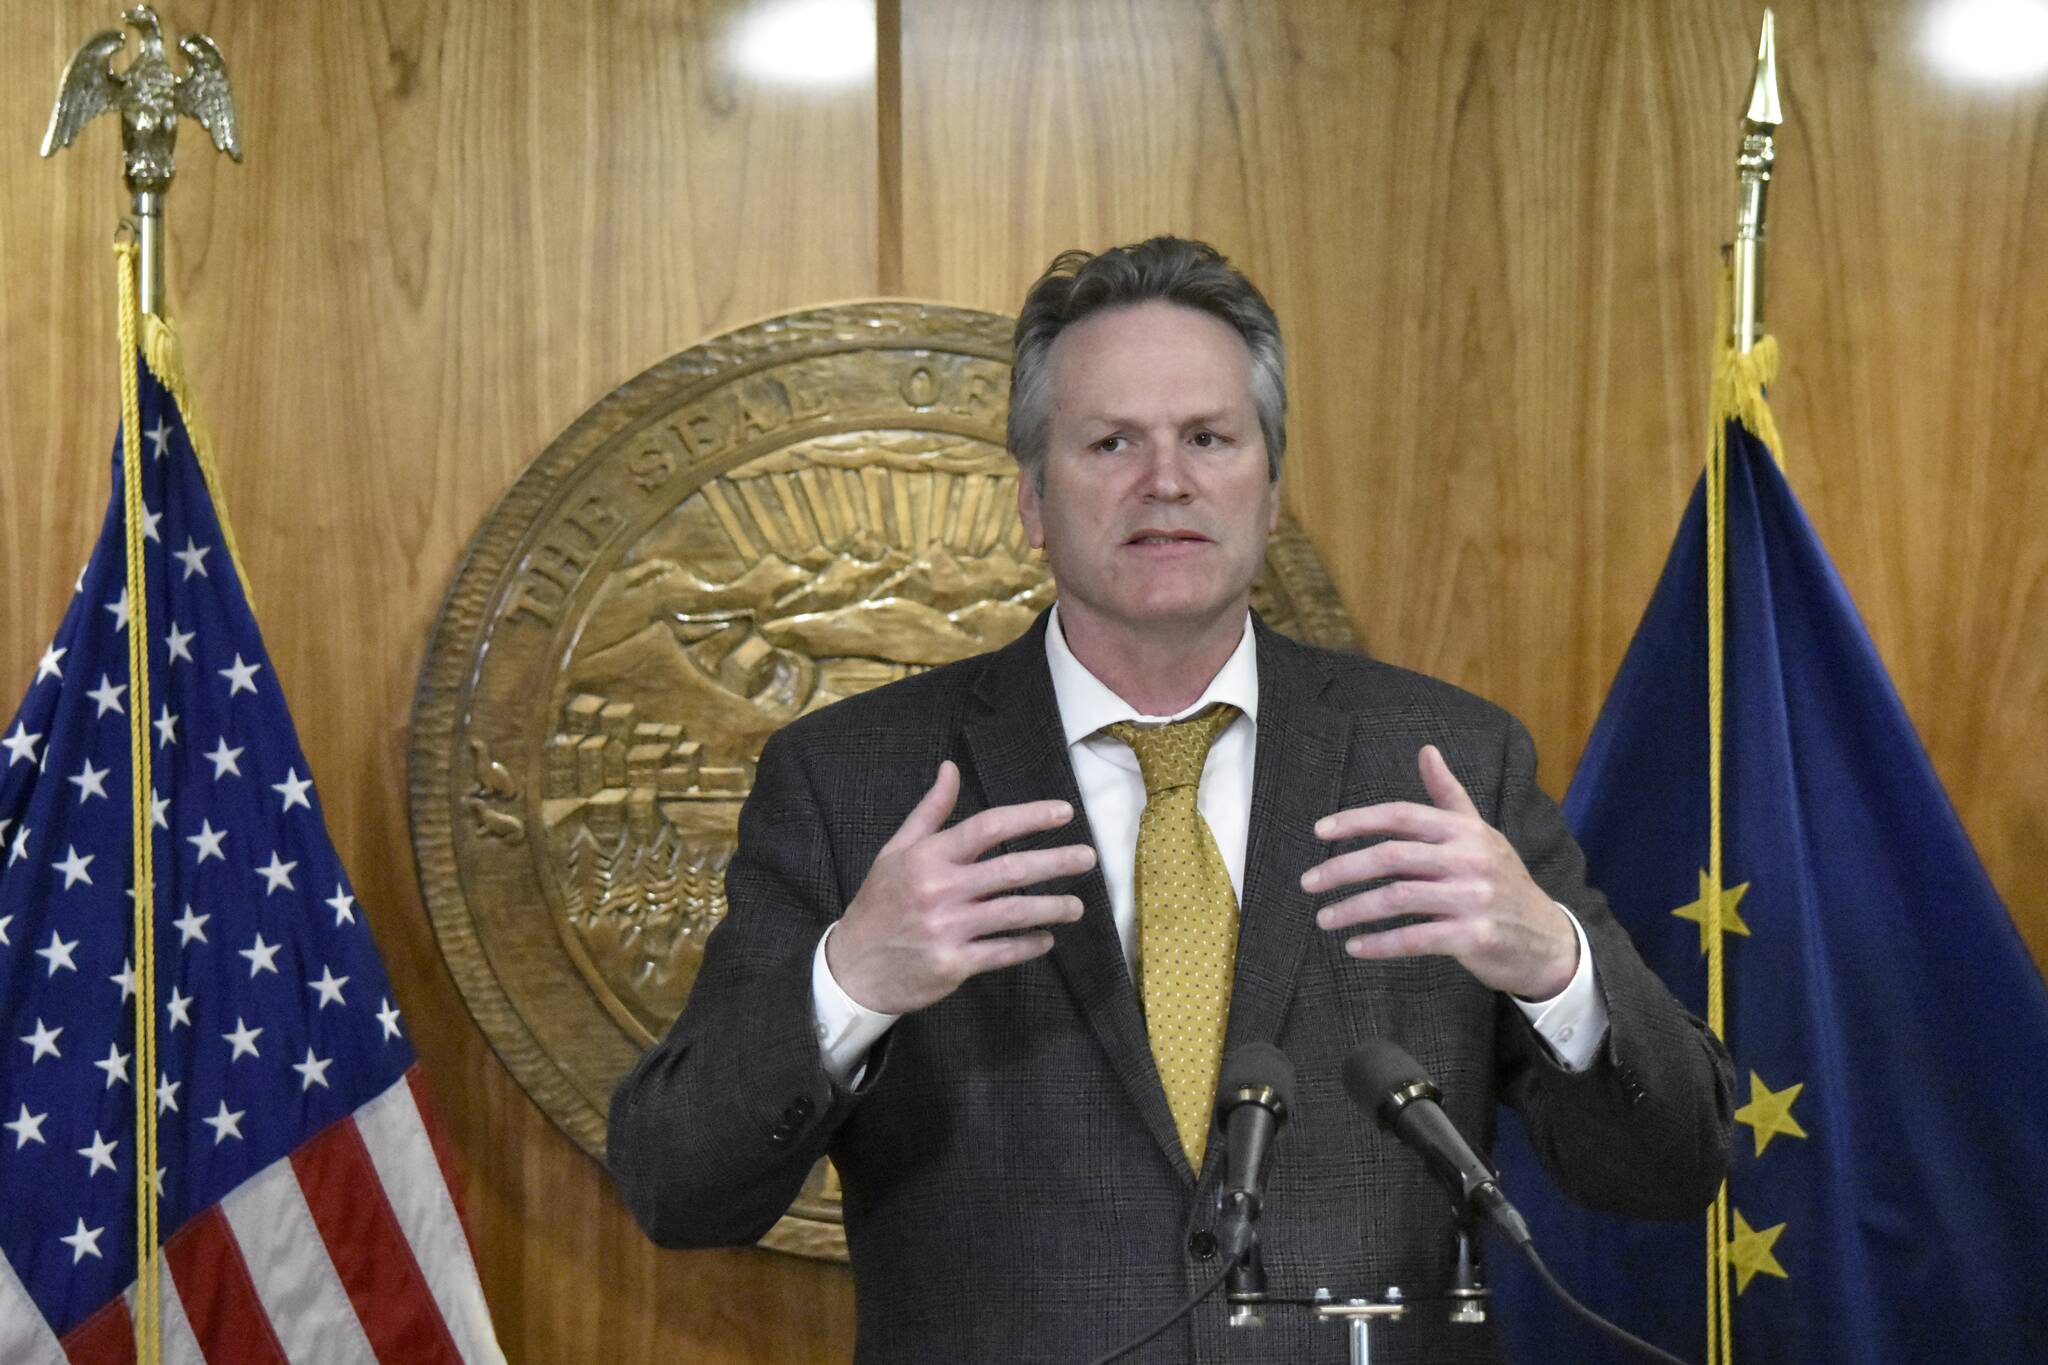 Peter Segall / Juneau Empire
Gov. Mike Dunleavy speaks with reporters Thursday about the state’s budget at the Alaska State Capitol. Dunleavy said lawmakers had sent a complete budget, and that there was no need for a special session.